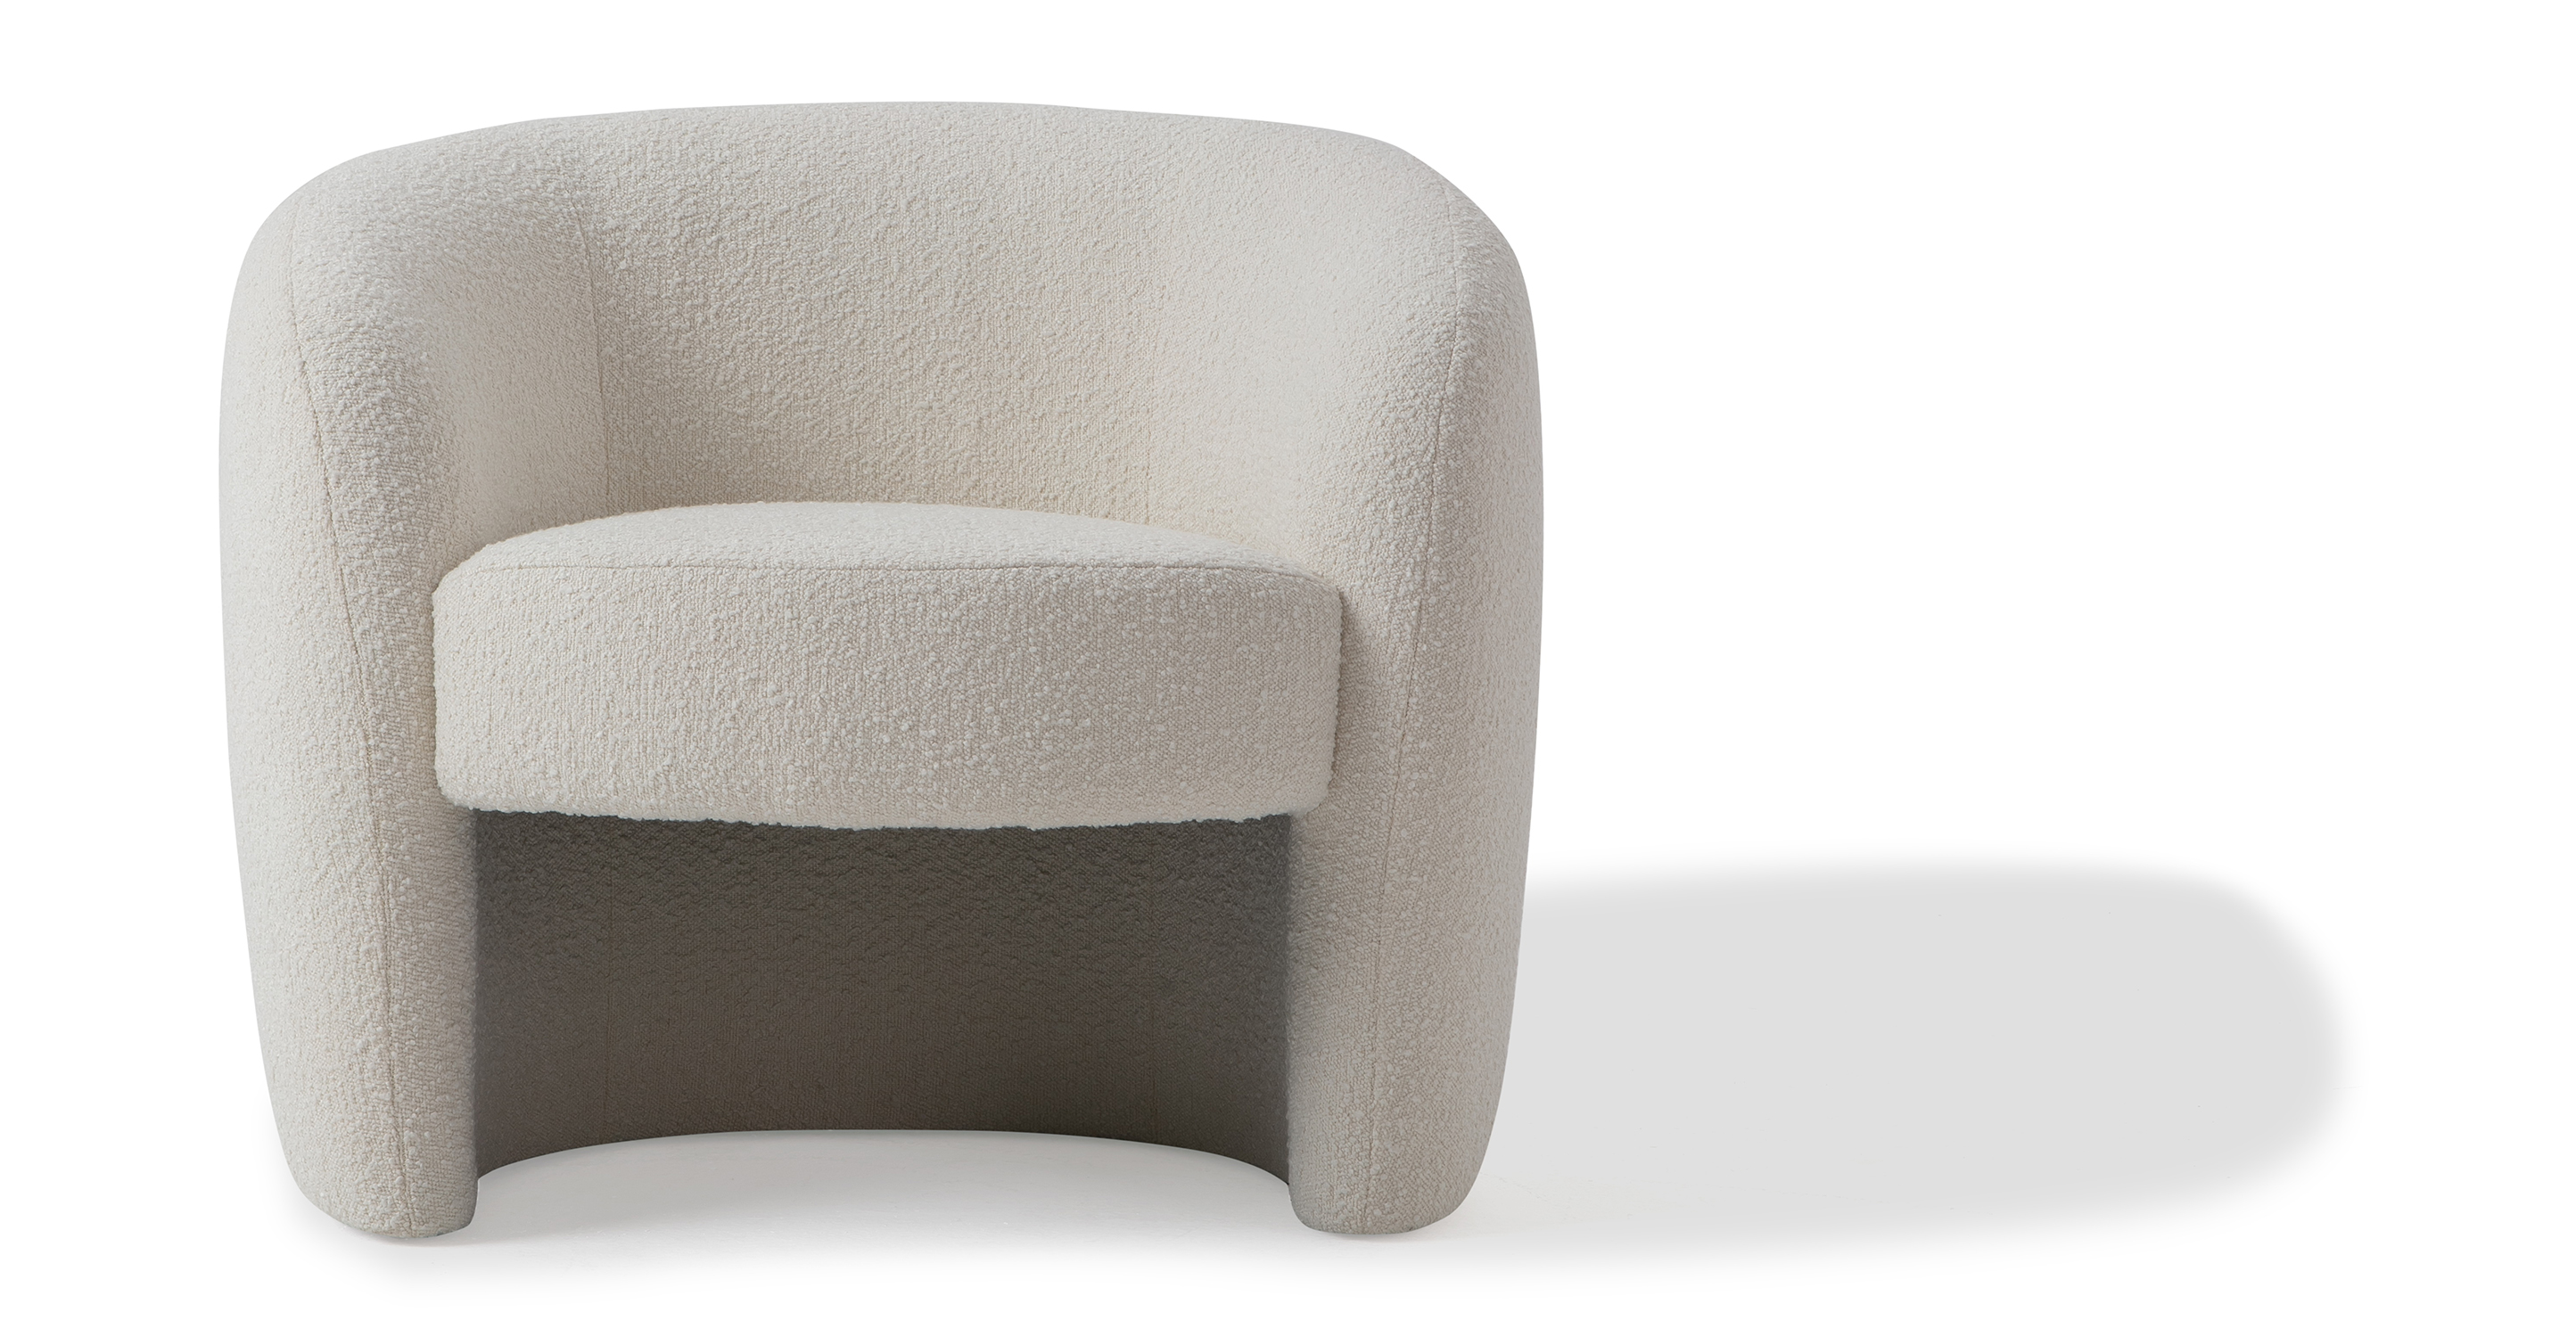 Blanc Miranda fully upholstered floor chair. Chair shape is a C shape with hollowed center. The seat is mounted to the back and sides of the chair and gives the illusion of floating. The chair is unique and modern.